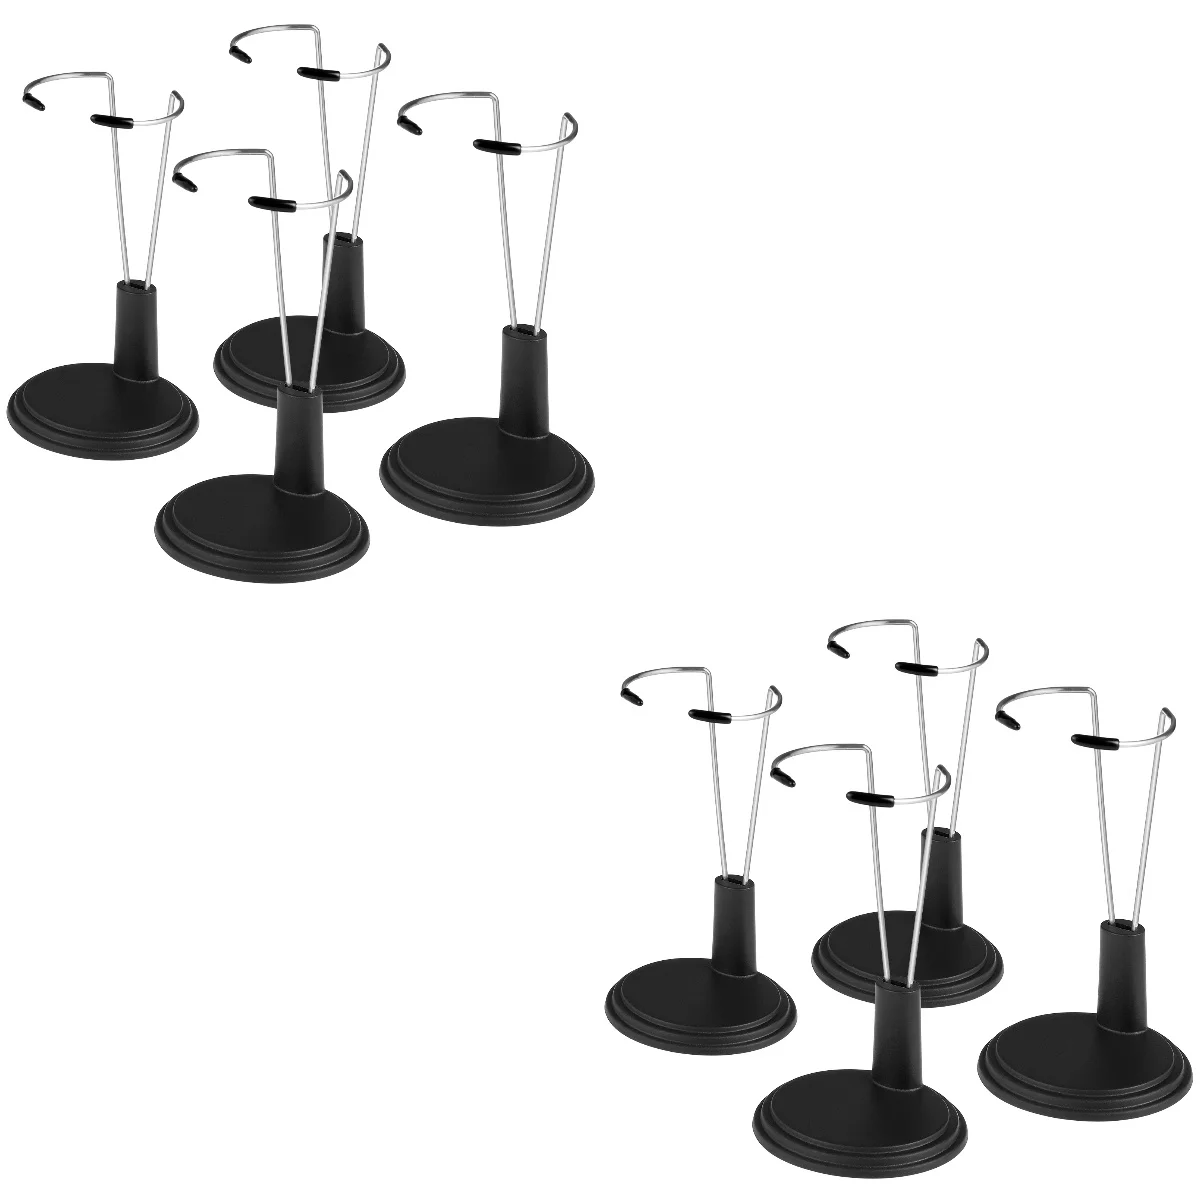 

8 Pcs Support Stands Action Figure Display Stands Organizers Display Brackets Holders for Home Shop